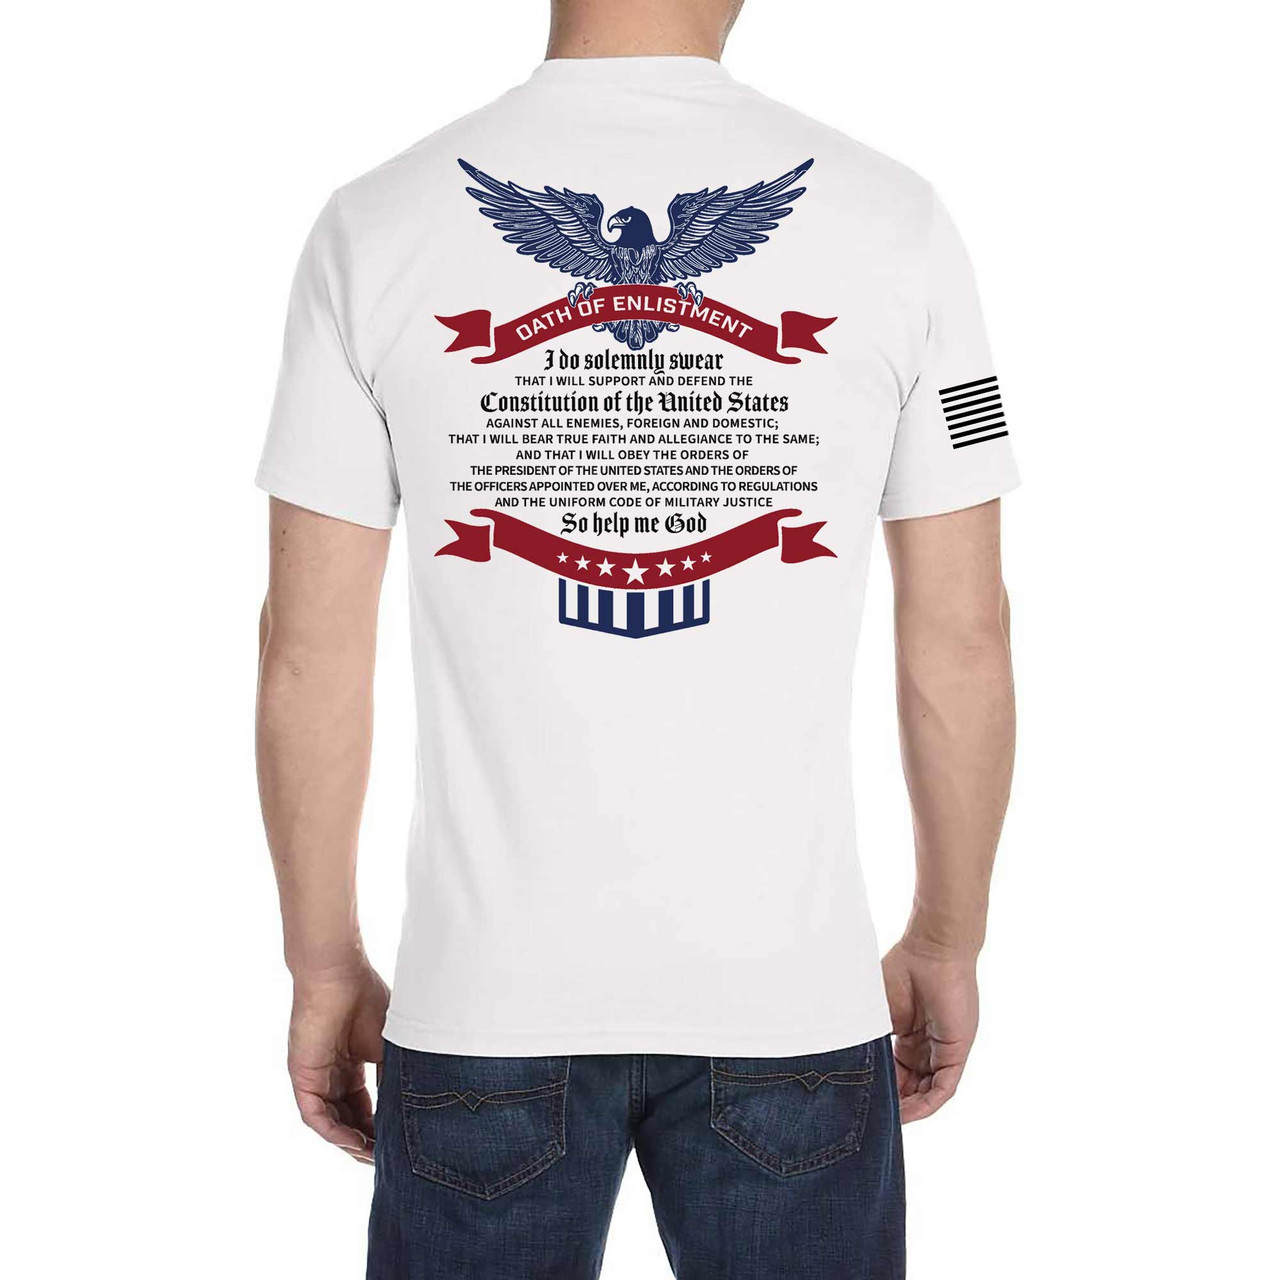 Oath of Enlistment T-Shirt back in white